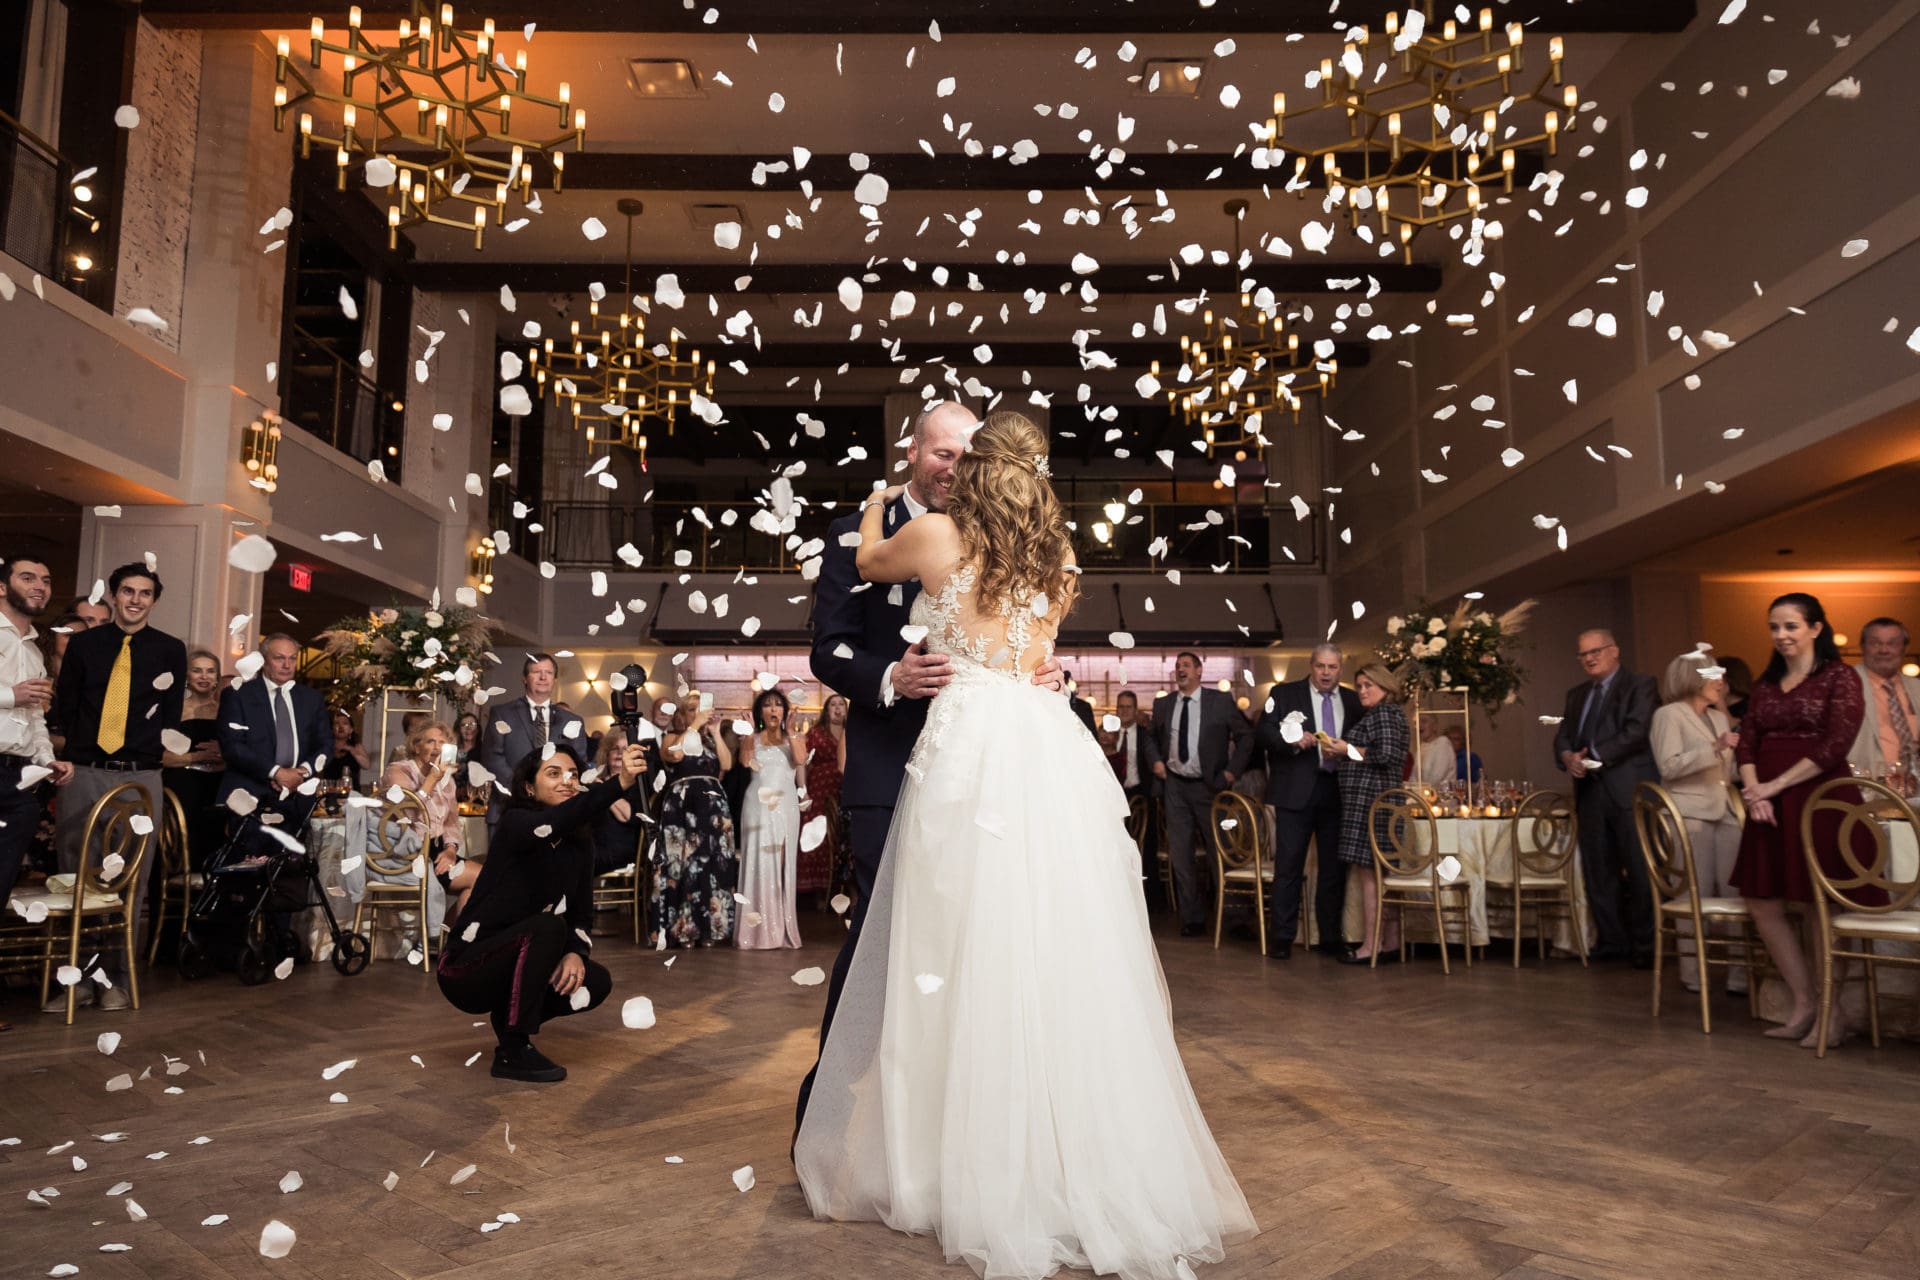 Bride and groom dancing during their first dance with a flower canon shooting white rose petals onto the dance floor